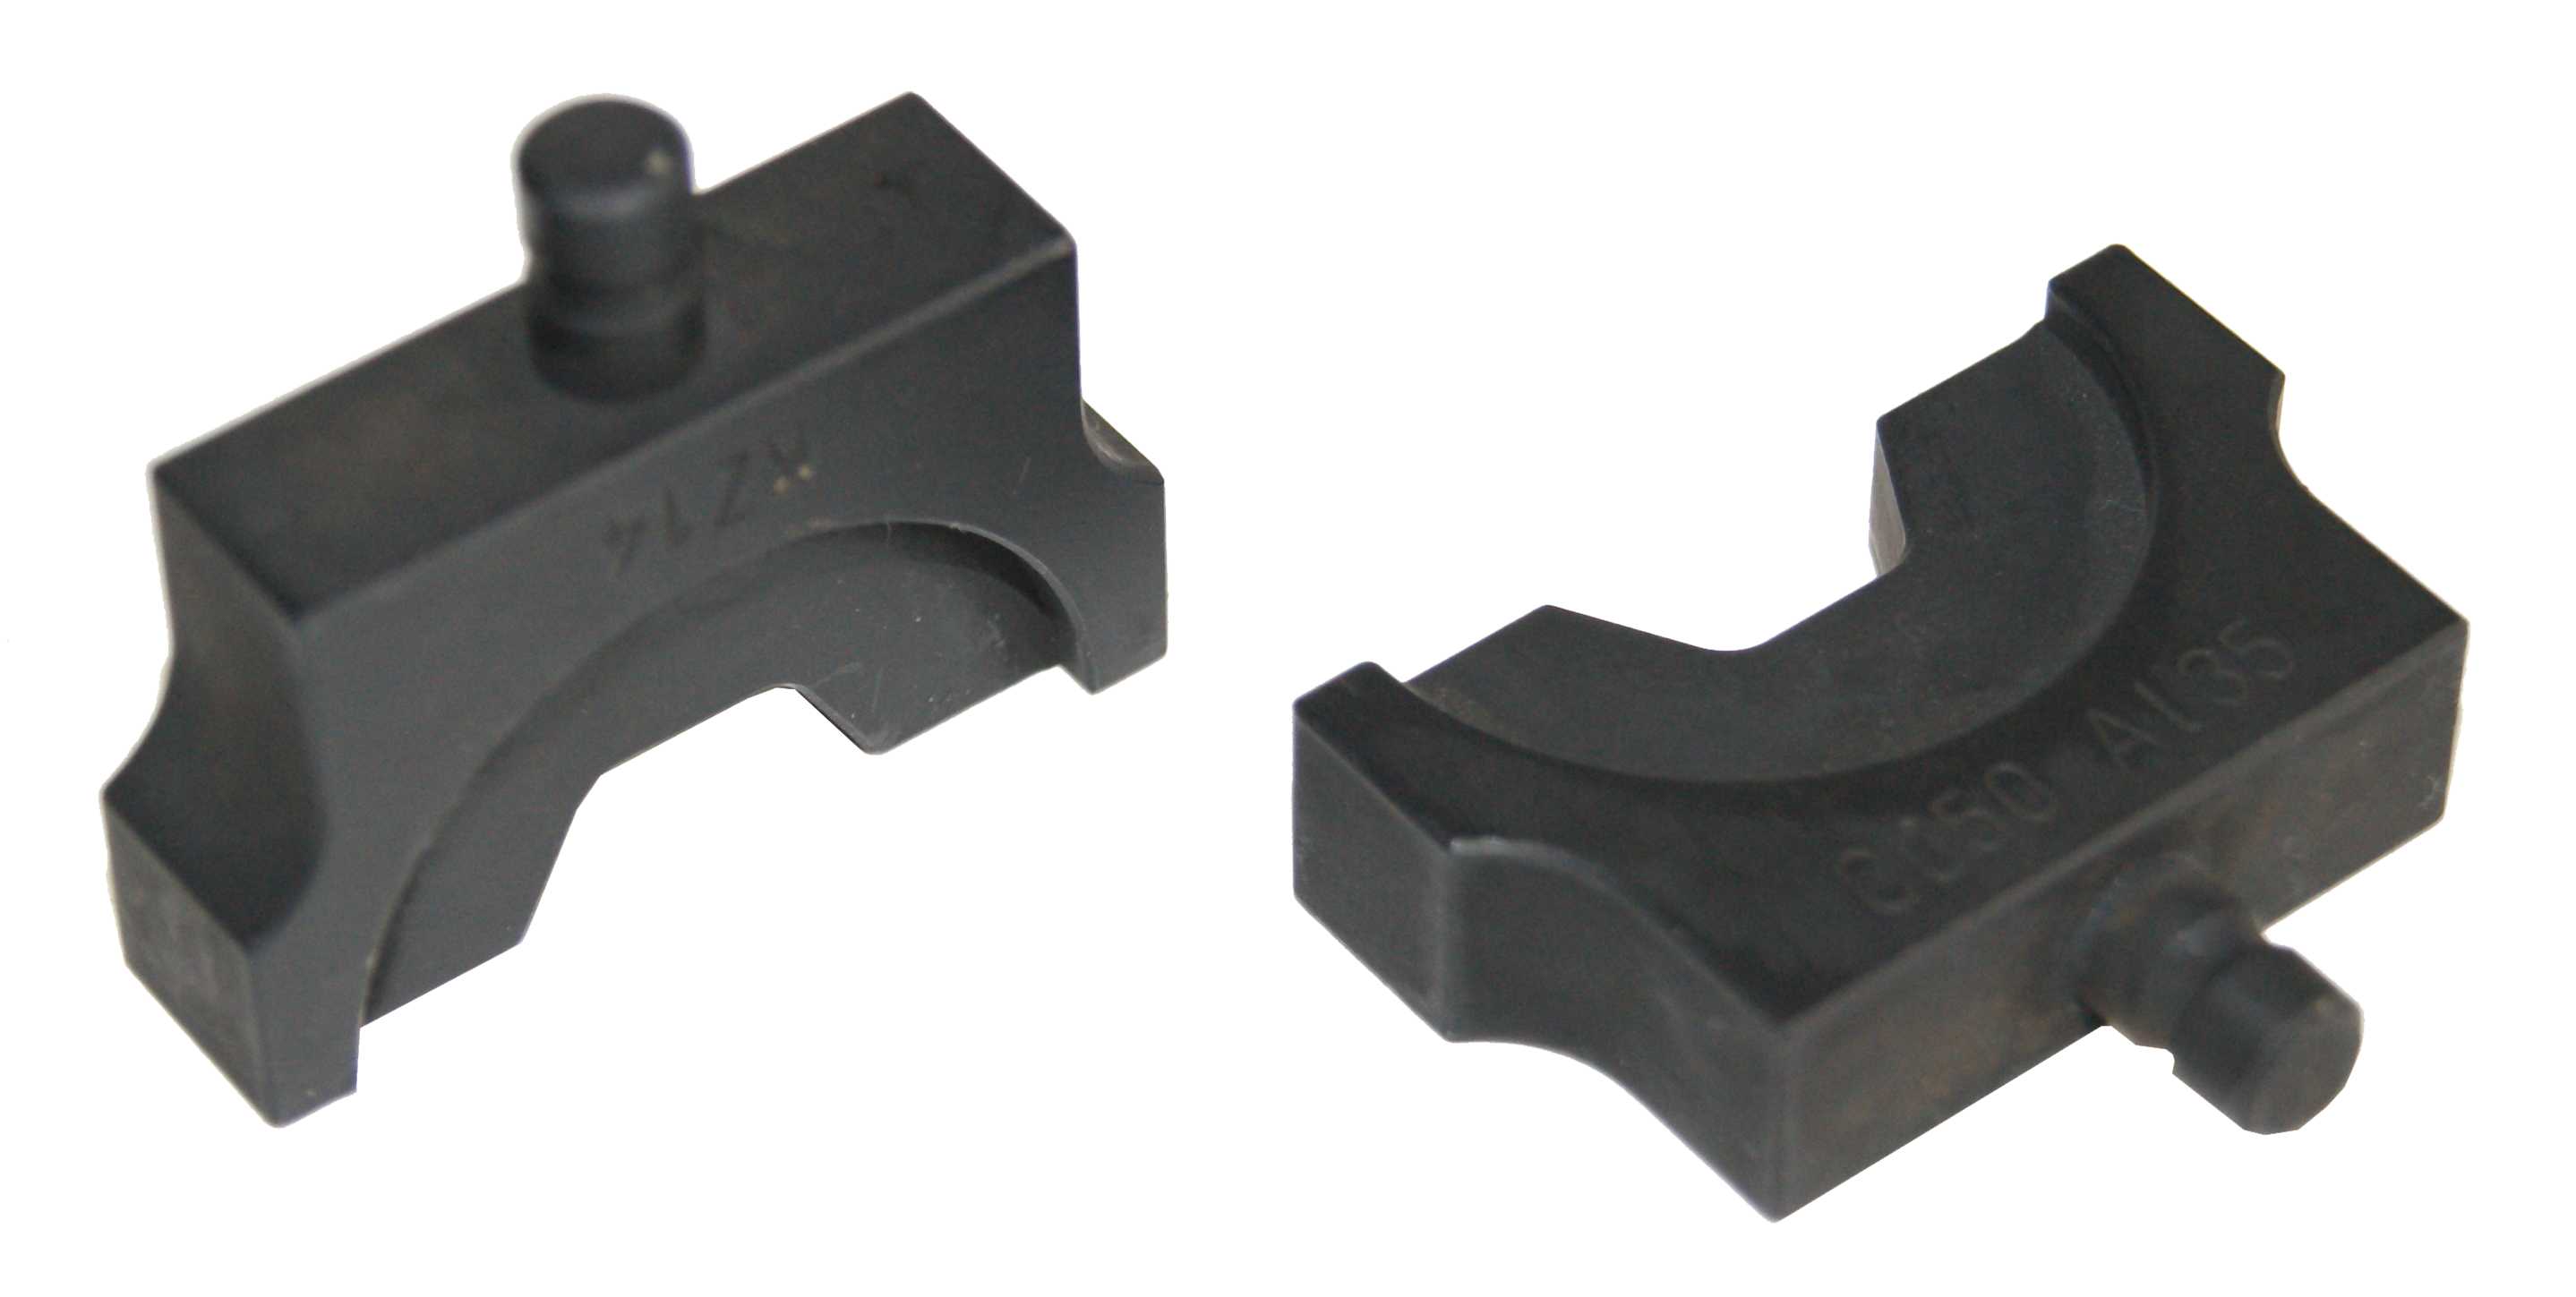 POI-35: Oval crimping insert for insulated tubular cable lugs and connectors, "35" series